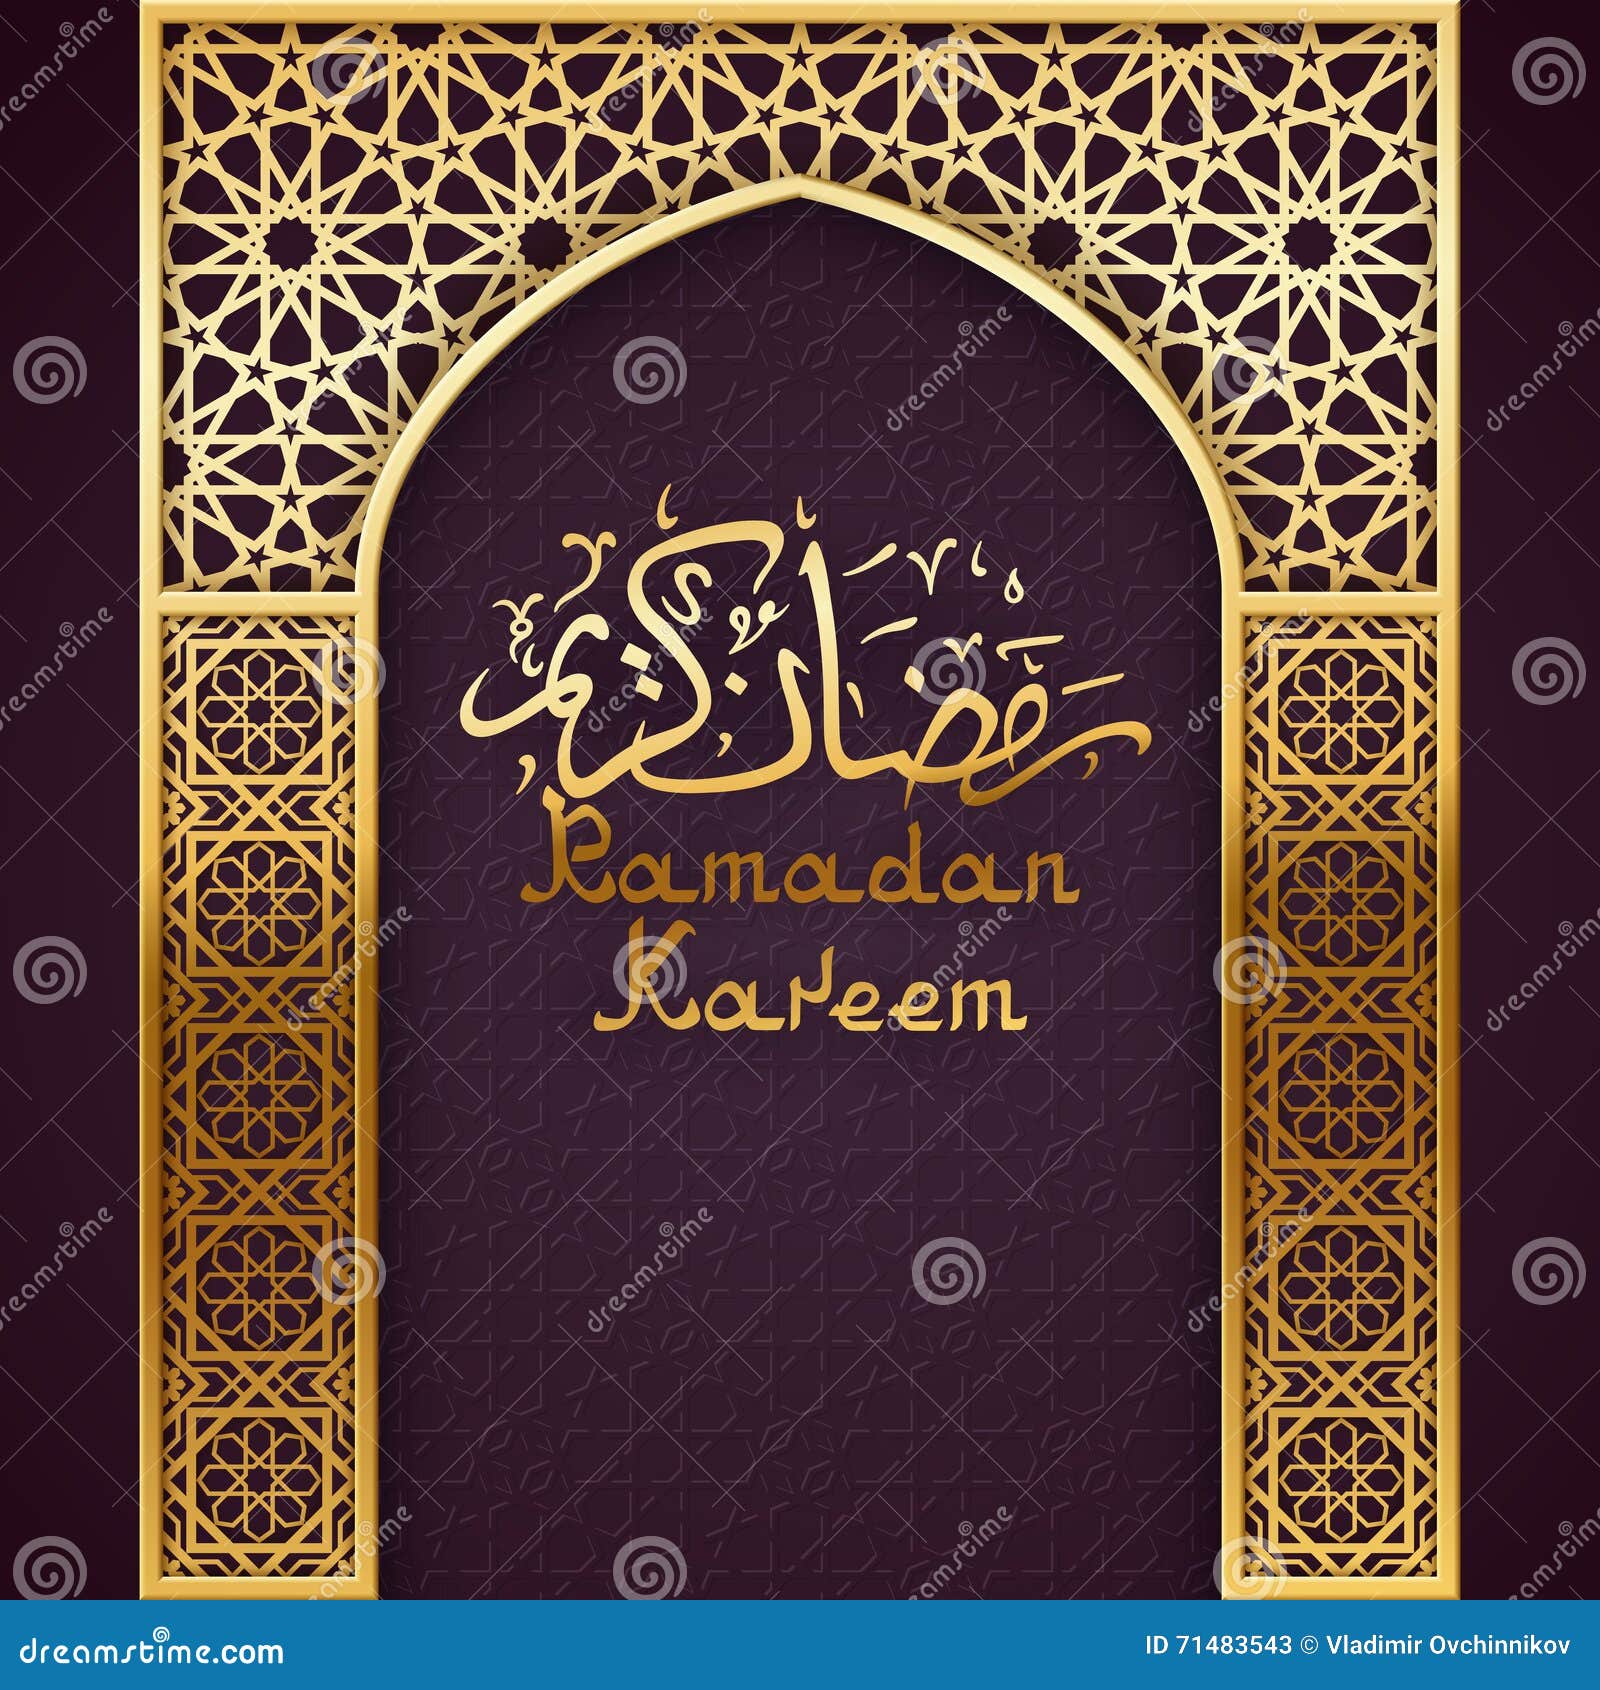 ramadan background with golden arch